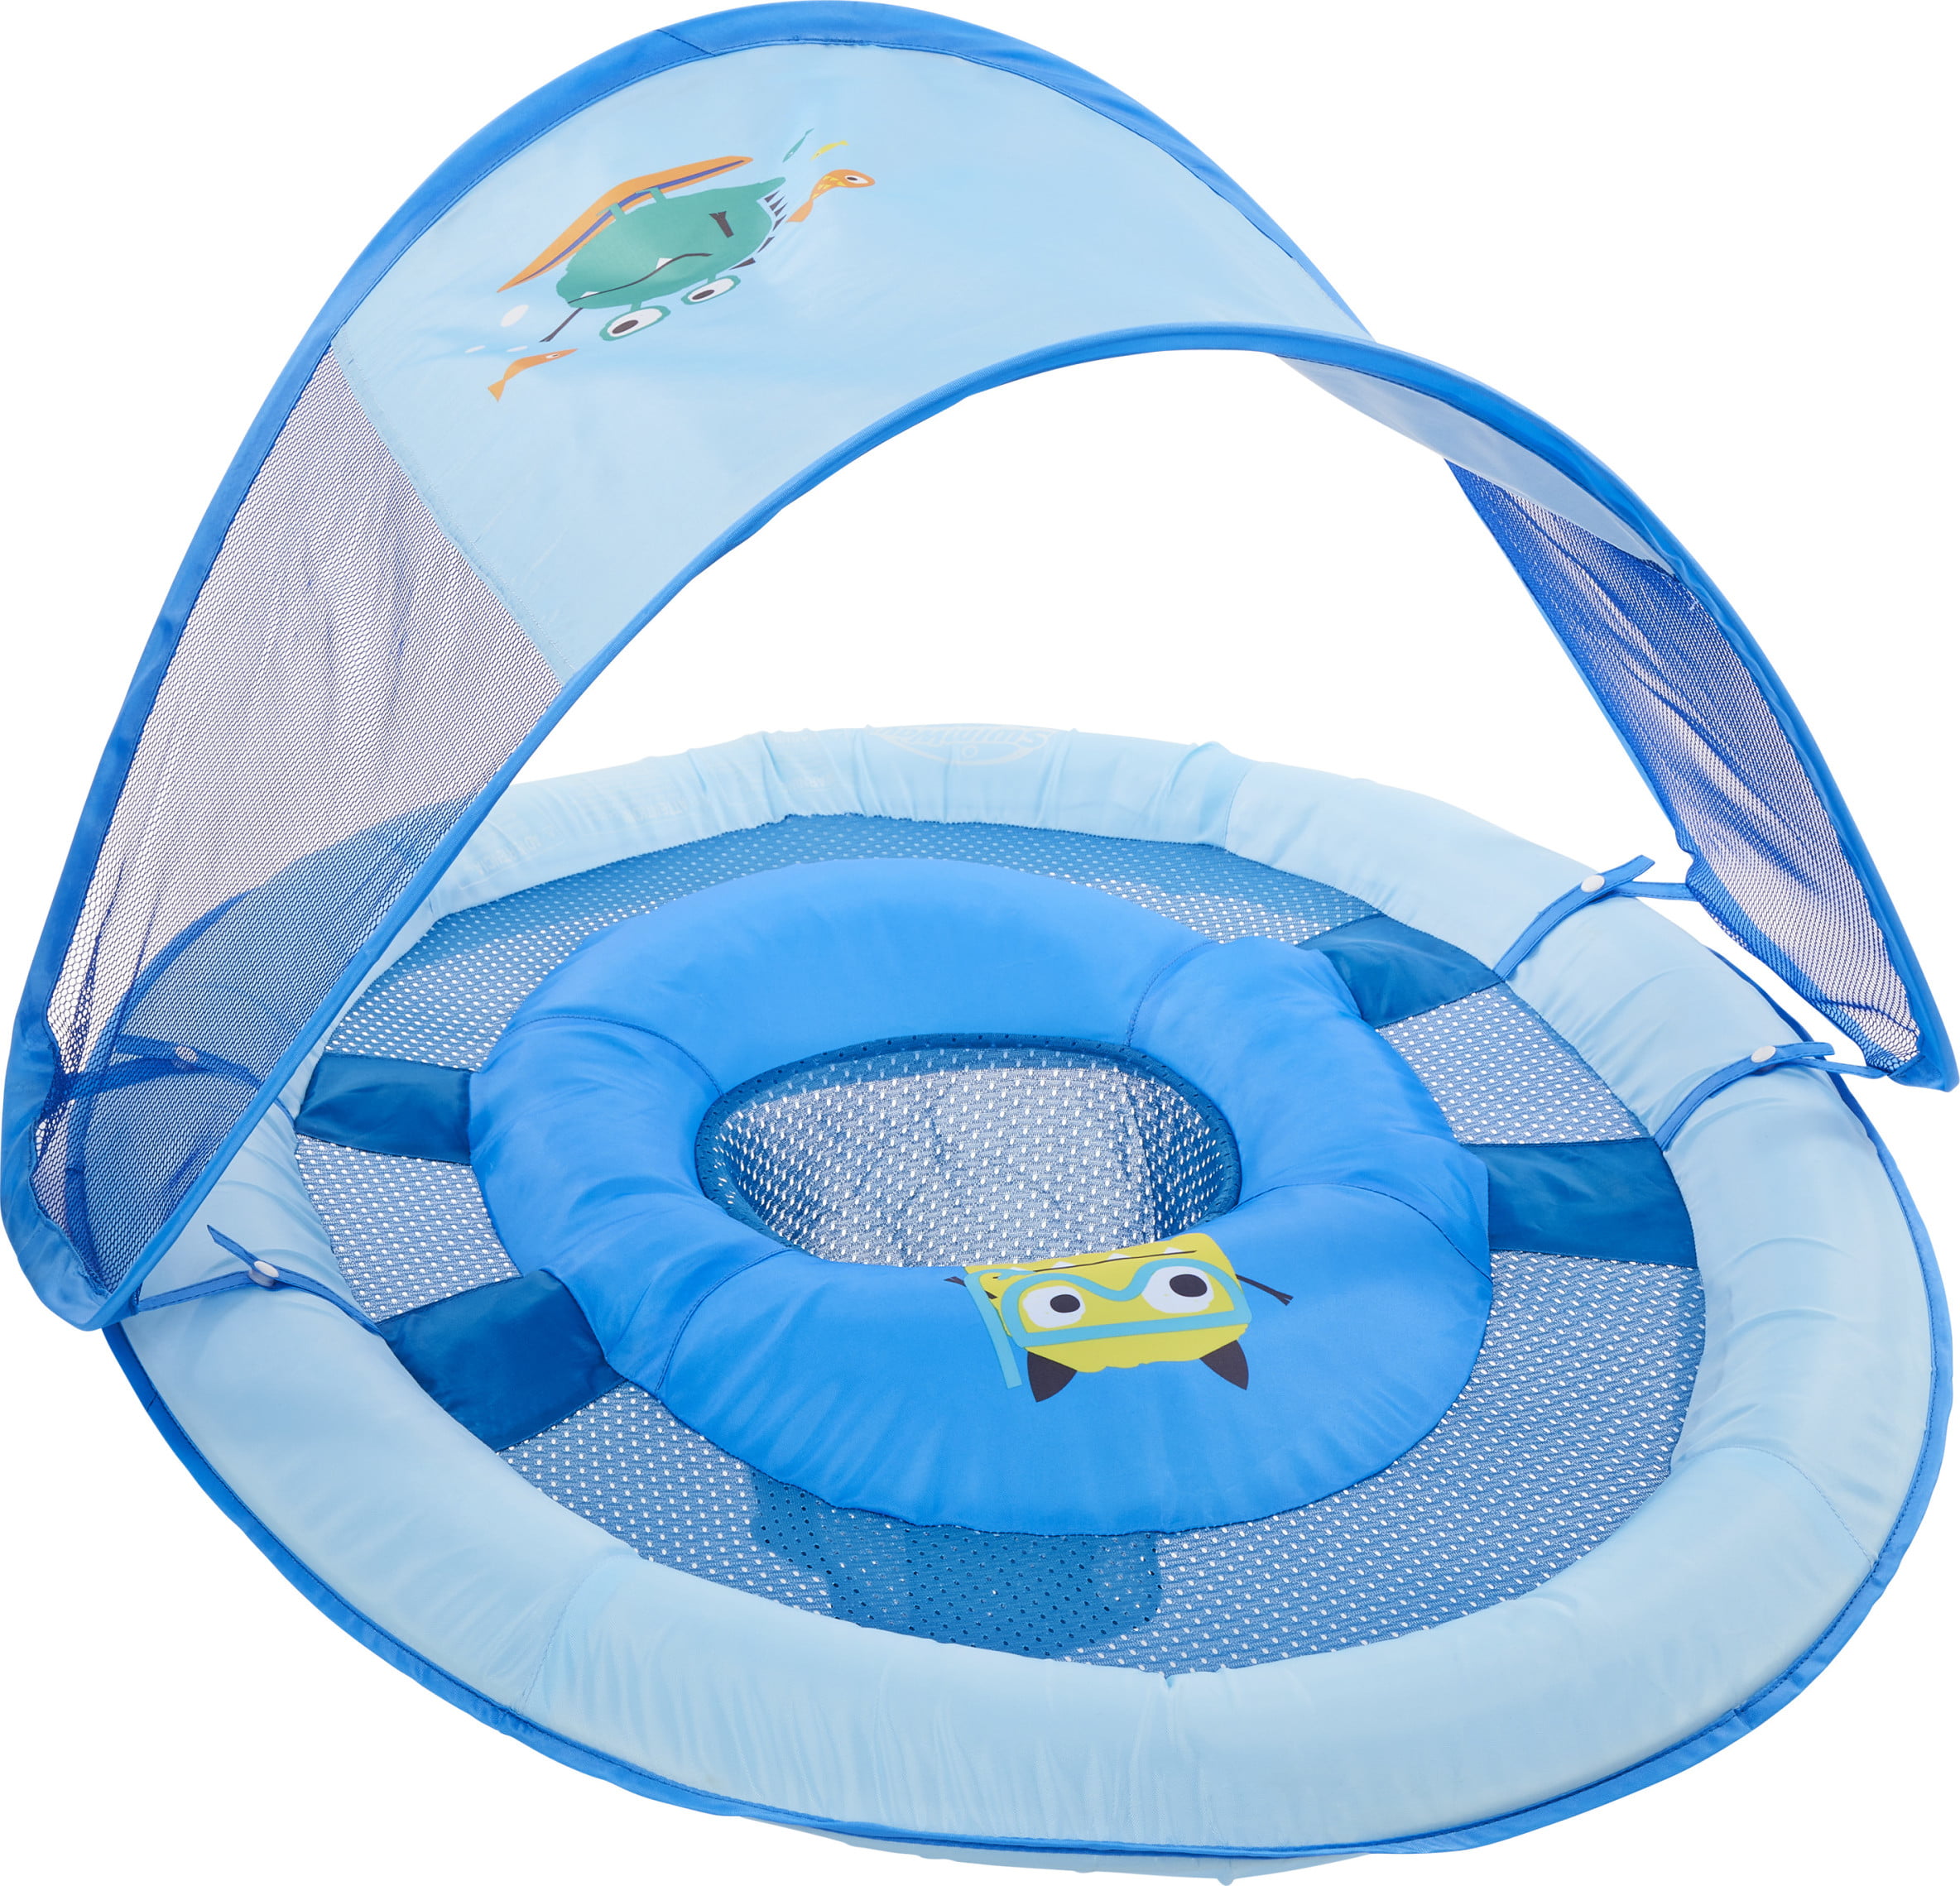 SwimWays Pinkfong Bay Shark Sun Canopy Baby Boat Pool Float 6056713 for sale online 